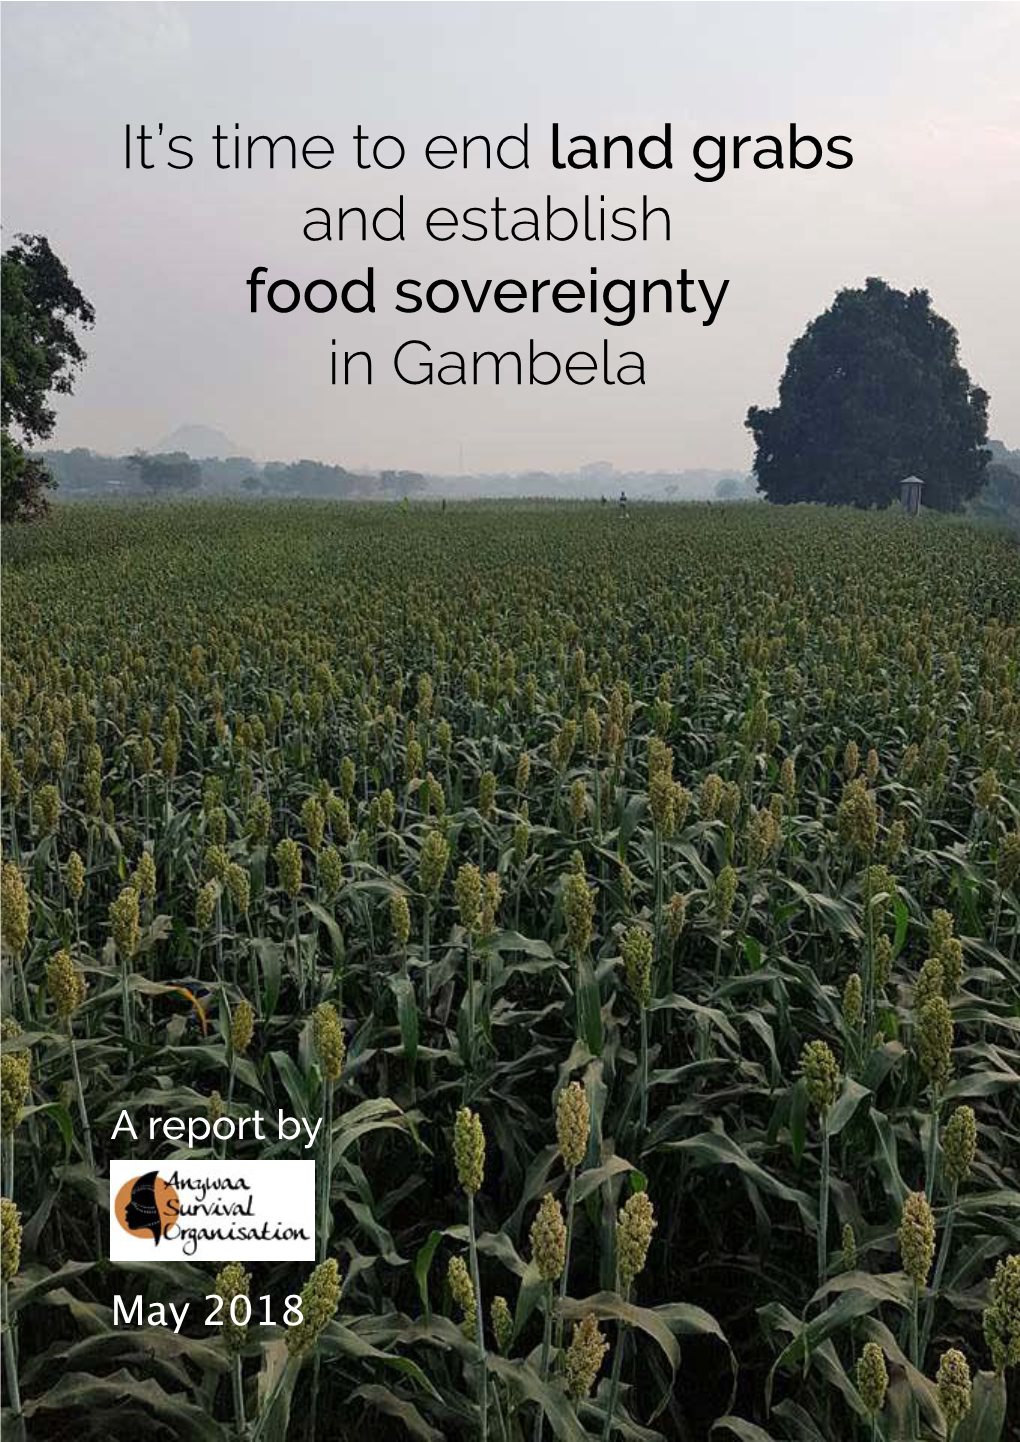 It's Time to End Land Grabs and Establish Food Sovereignty in Gambela